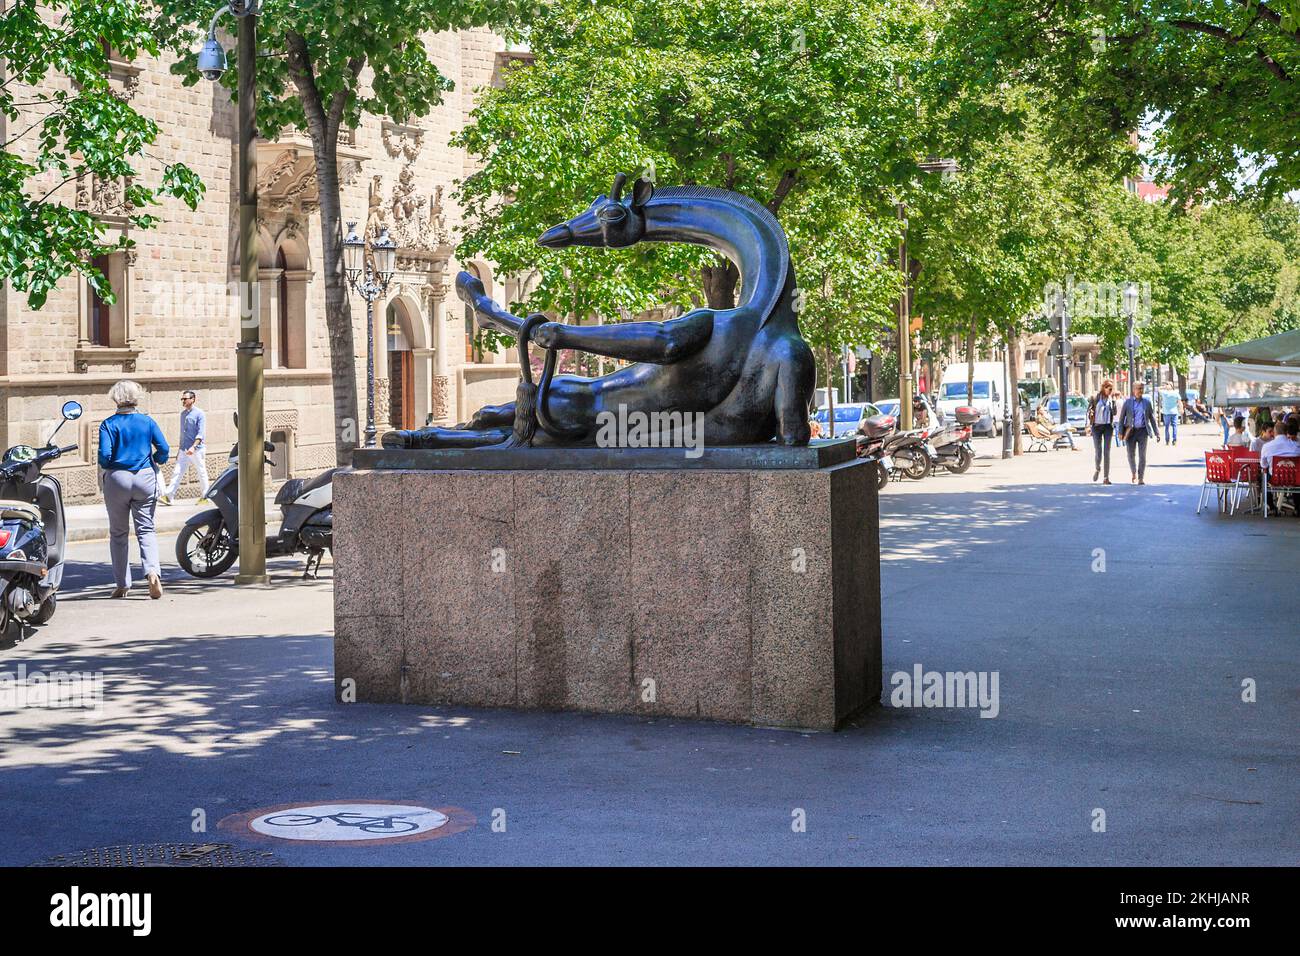 BARSELONA, SPAIN - MAY 12, 2017: Sculpture Resting Giraffe is a figure of a giraffe lying in a resting flirtatious pose on the boulevard in the center Stock Photo